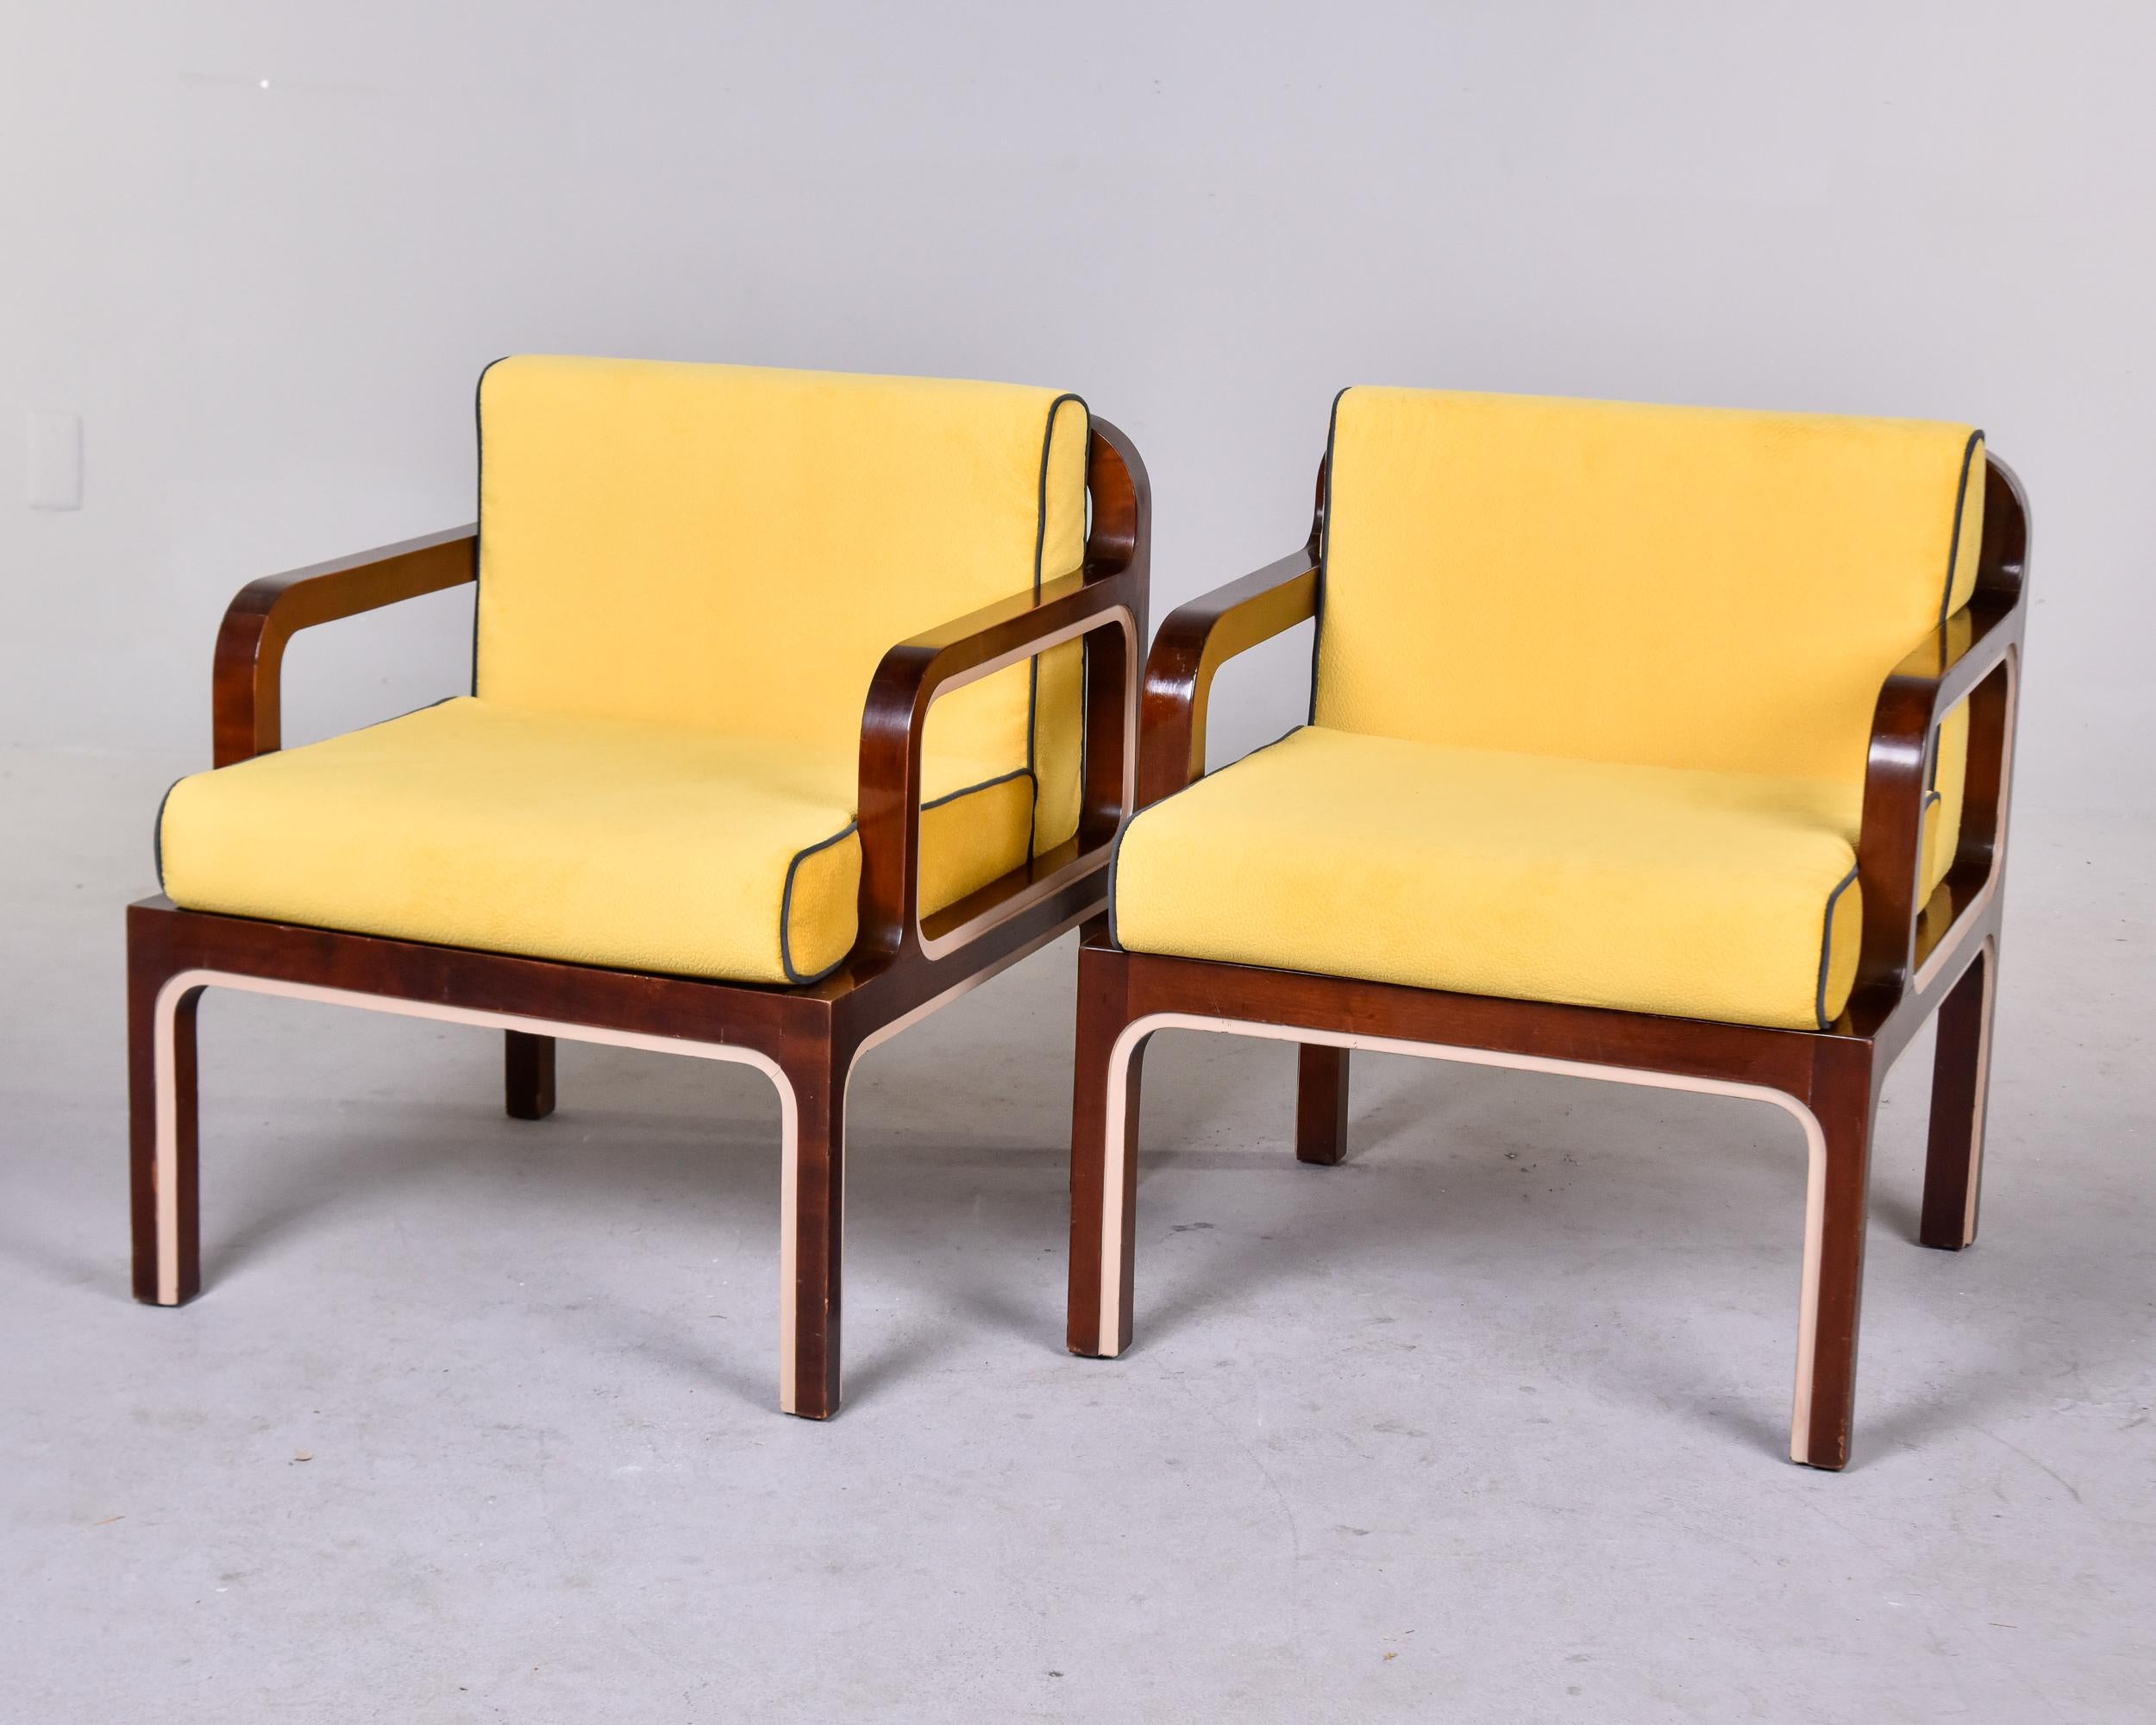 Midcentury English Mod Three Piece Set with Wood Framed Sofa and Pair Armchairs In Good Condition For Sale In Troy, MI